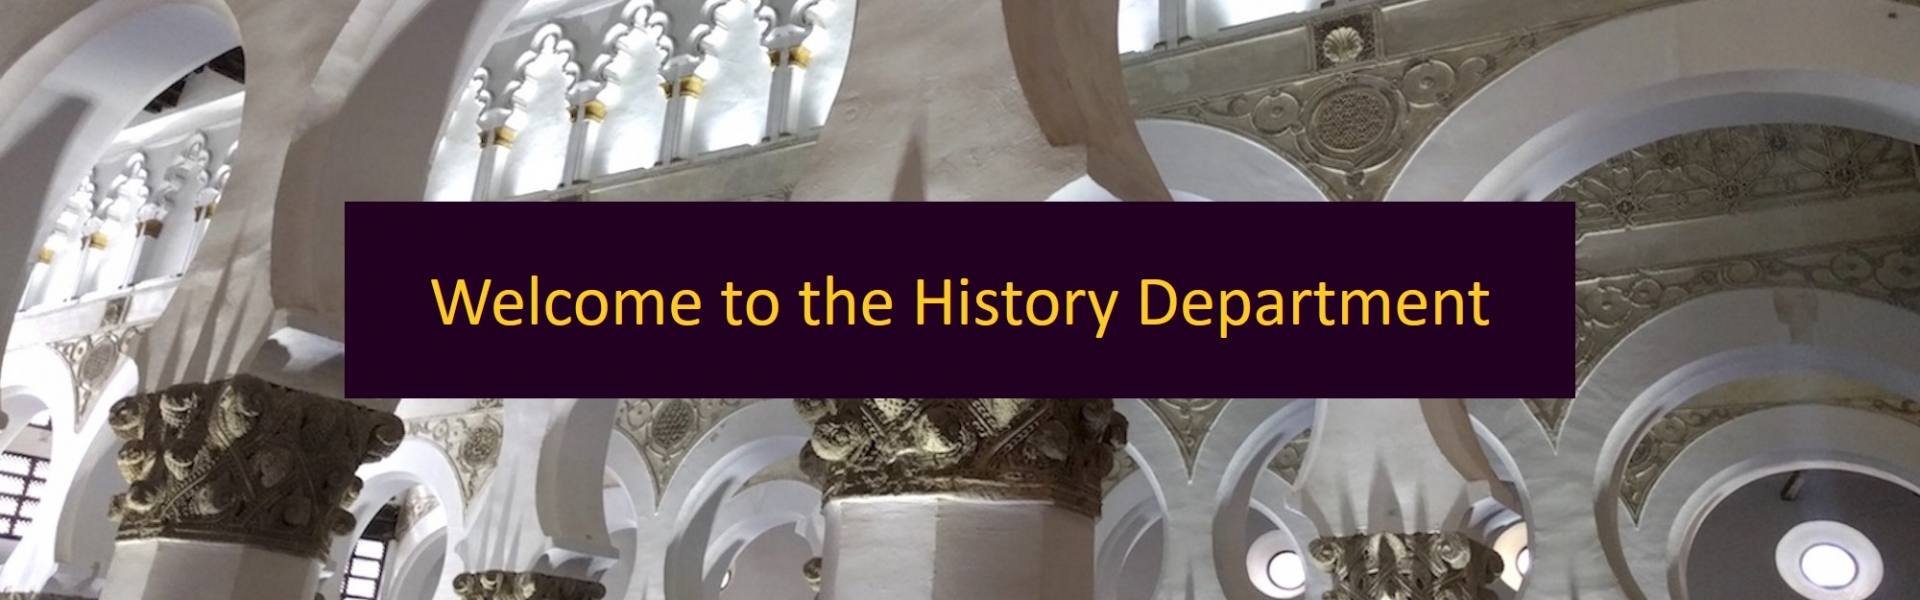 Welcome to the History Department in gold letters on purple banner, in background Moresque architecture